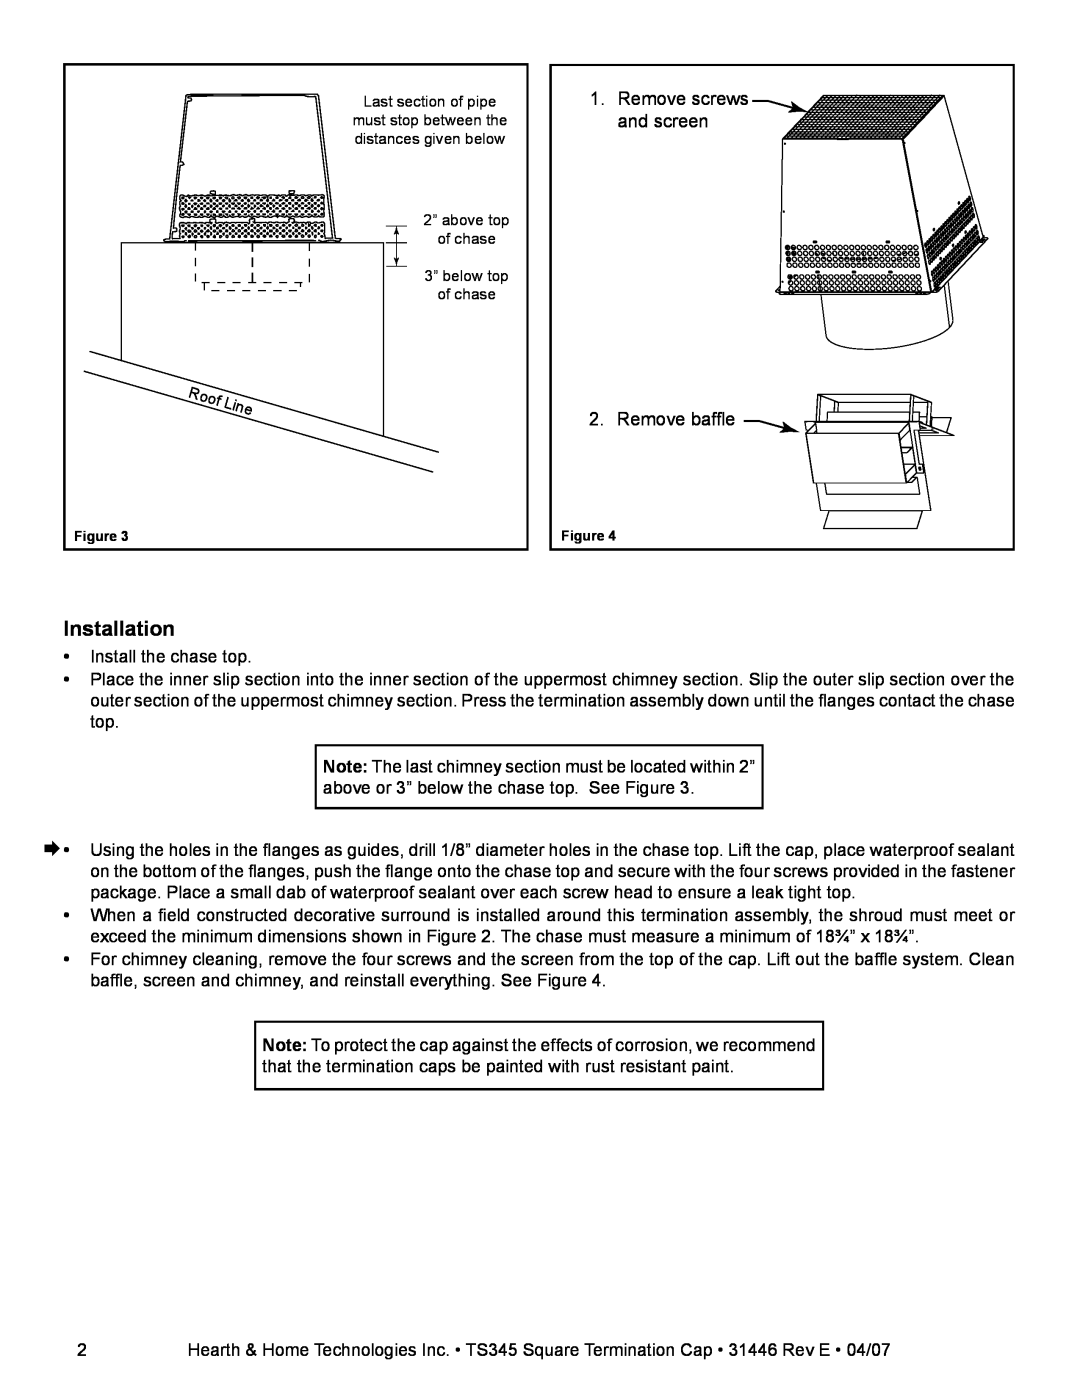 Hearth and Home Technologies TS345 installation instructions Installation, Remove screws and screen 2. Remove baffle 